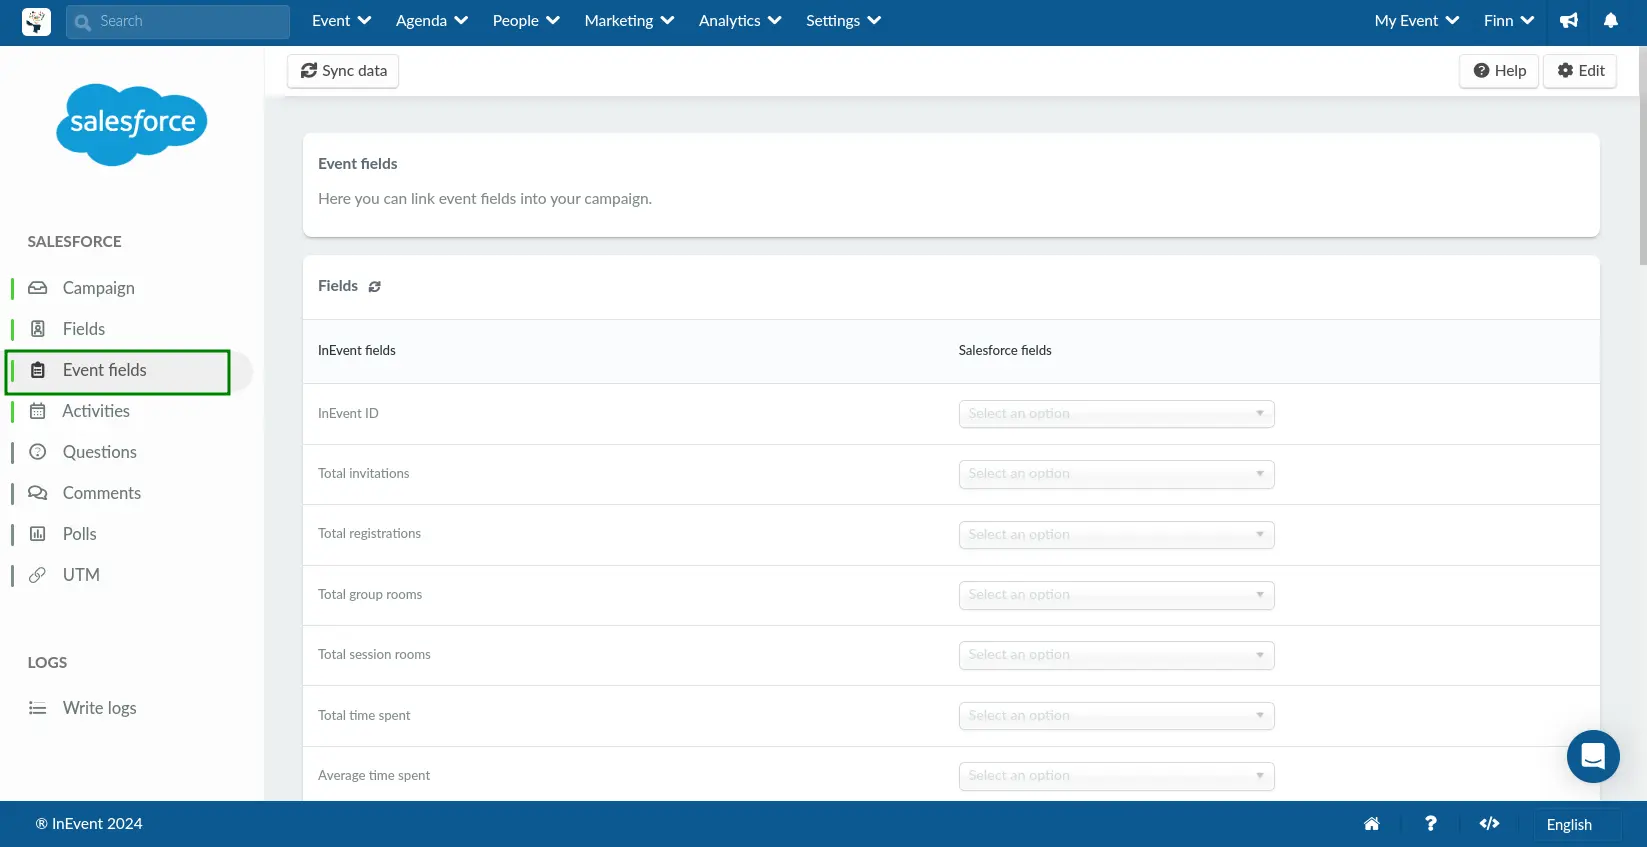 Screenshot showing the Event fields section of the Salesforce integration page.